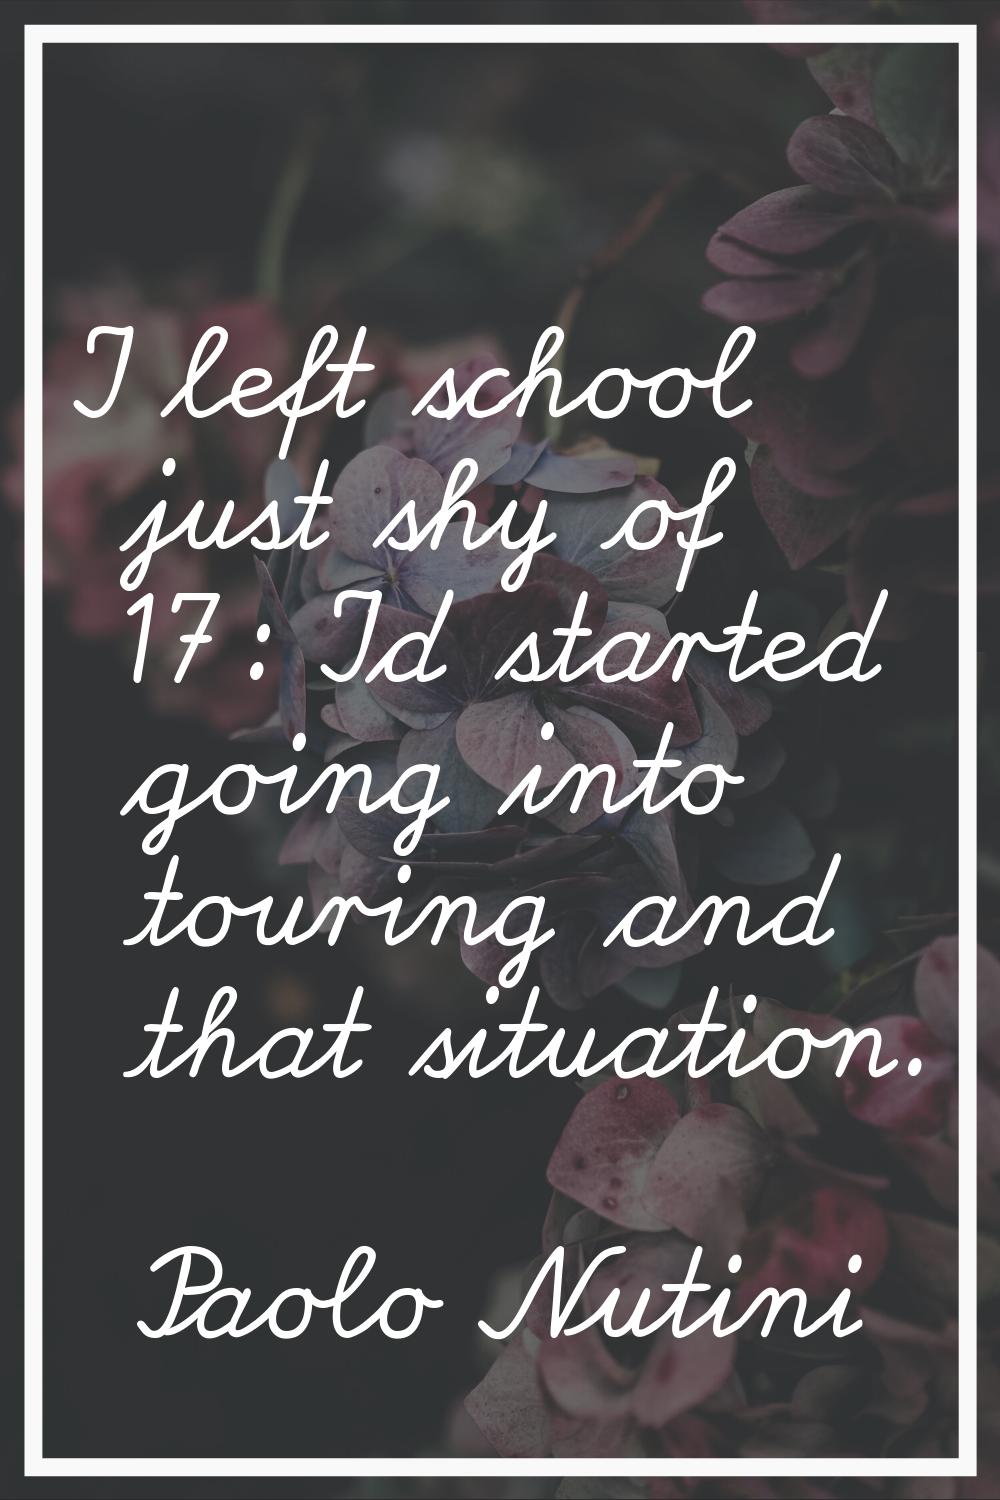 I left school just shy of 17: I'd started going into touring and that situation.